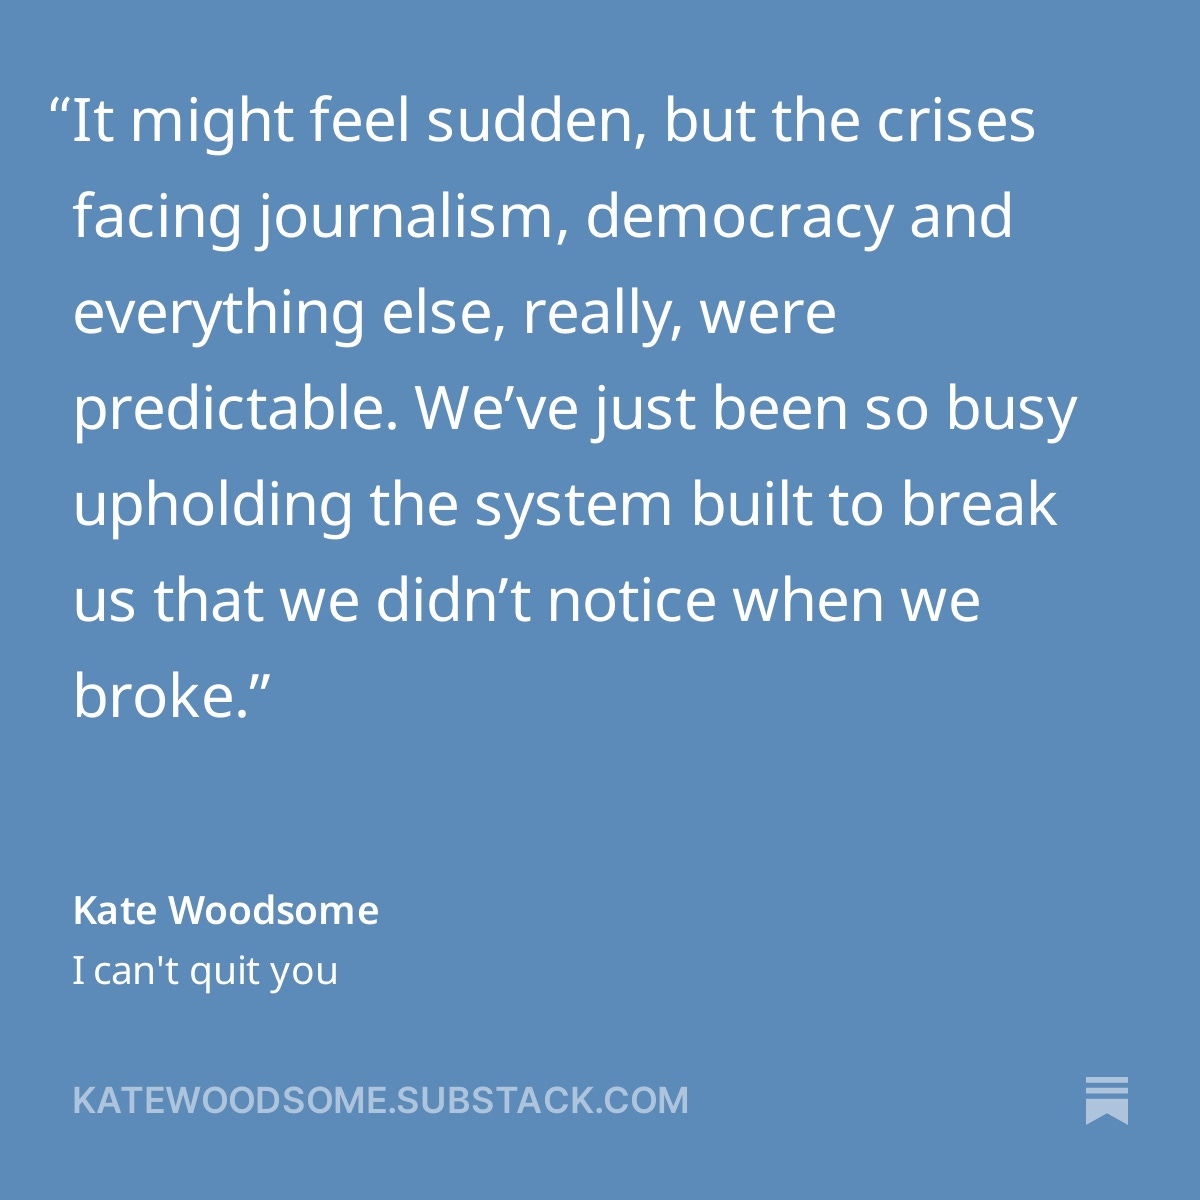 Did any of us dream of being a workaholic? My latest Substack on the cost of attaching our worth to our work and why now might be a good time to say f*ck it. #journalism #mentalhealth #democracy open.substack.com/pub/katewoodso…